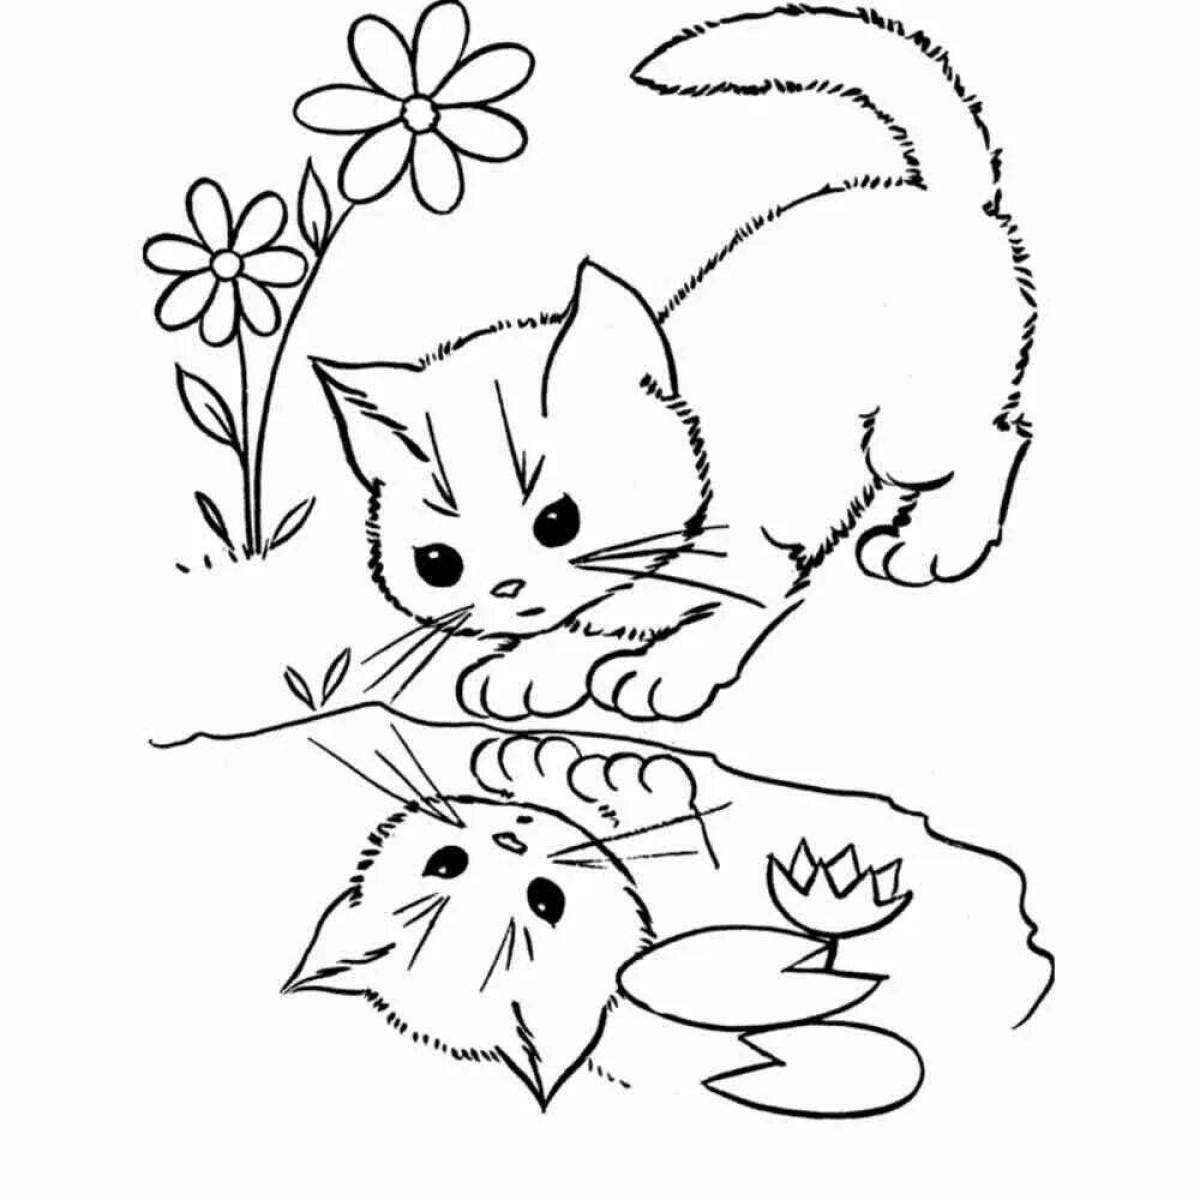 Creative animal coloring page